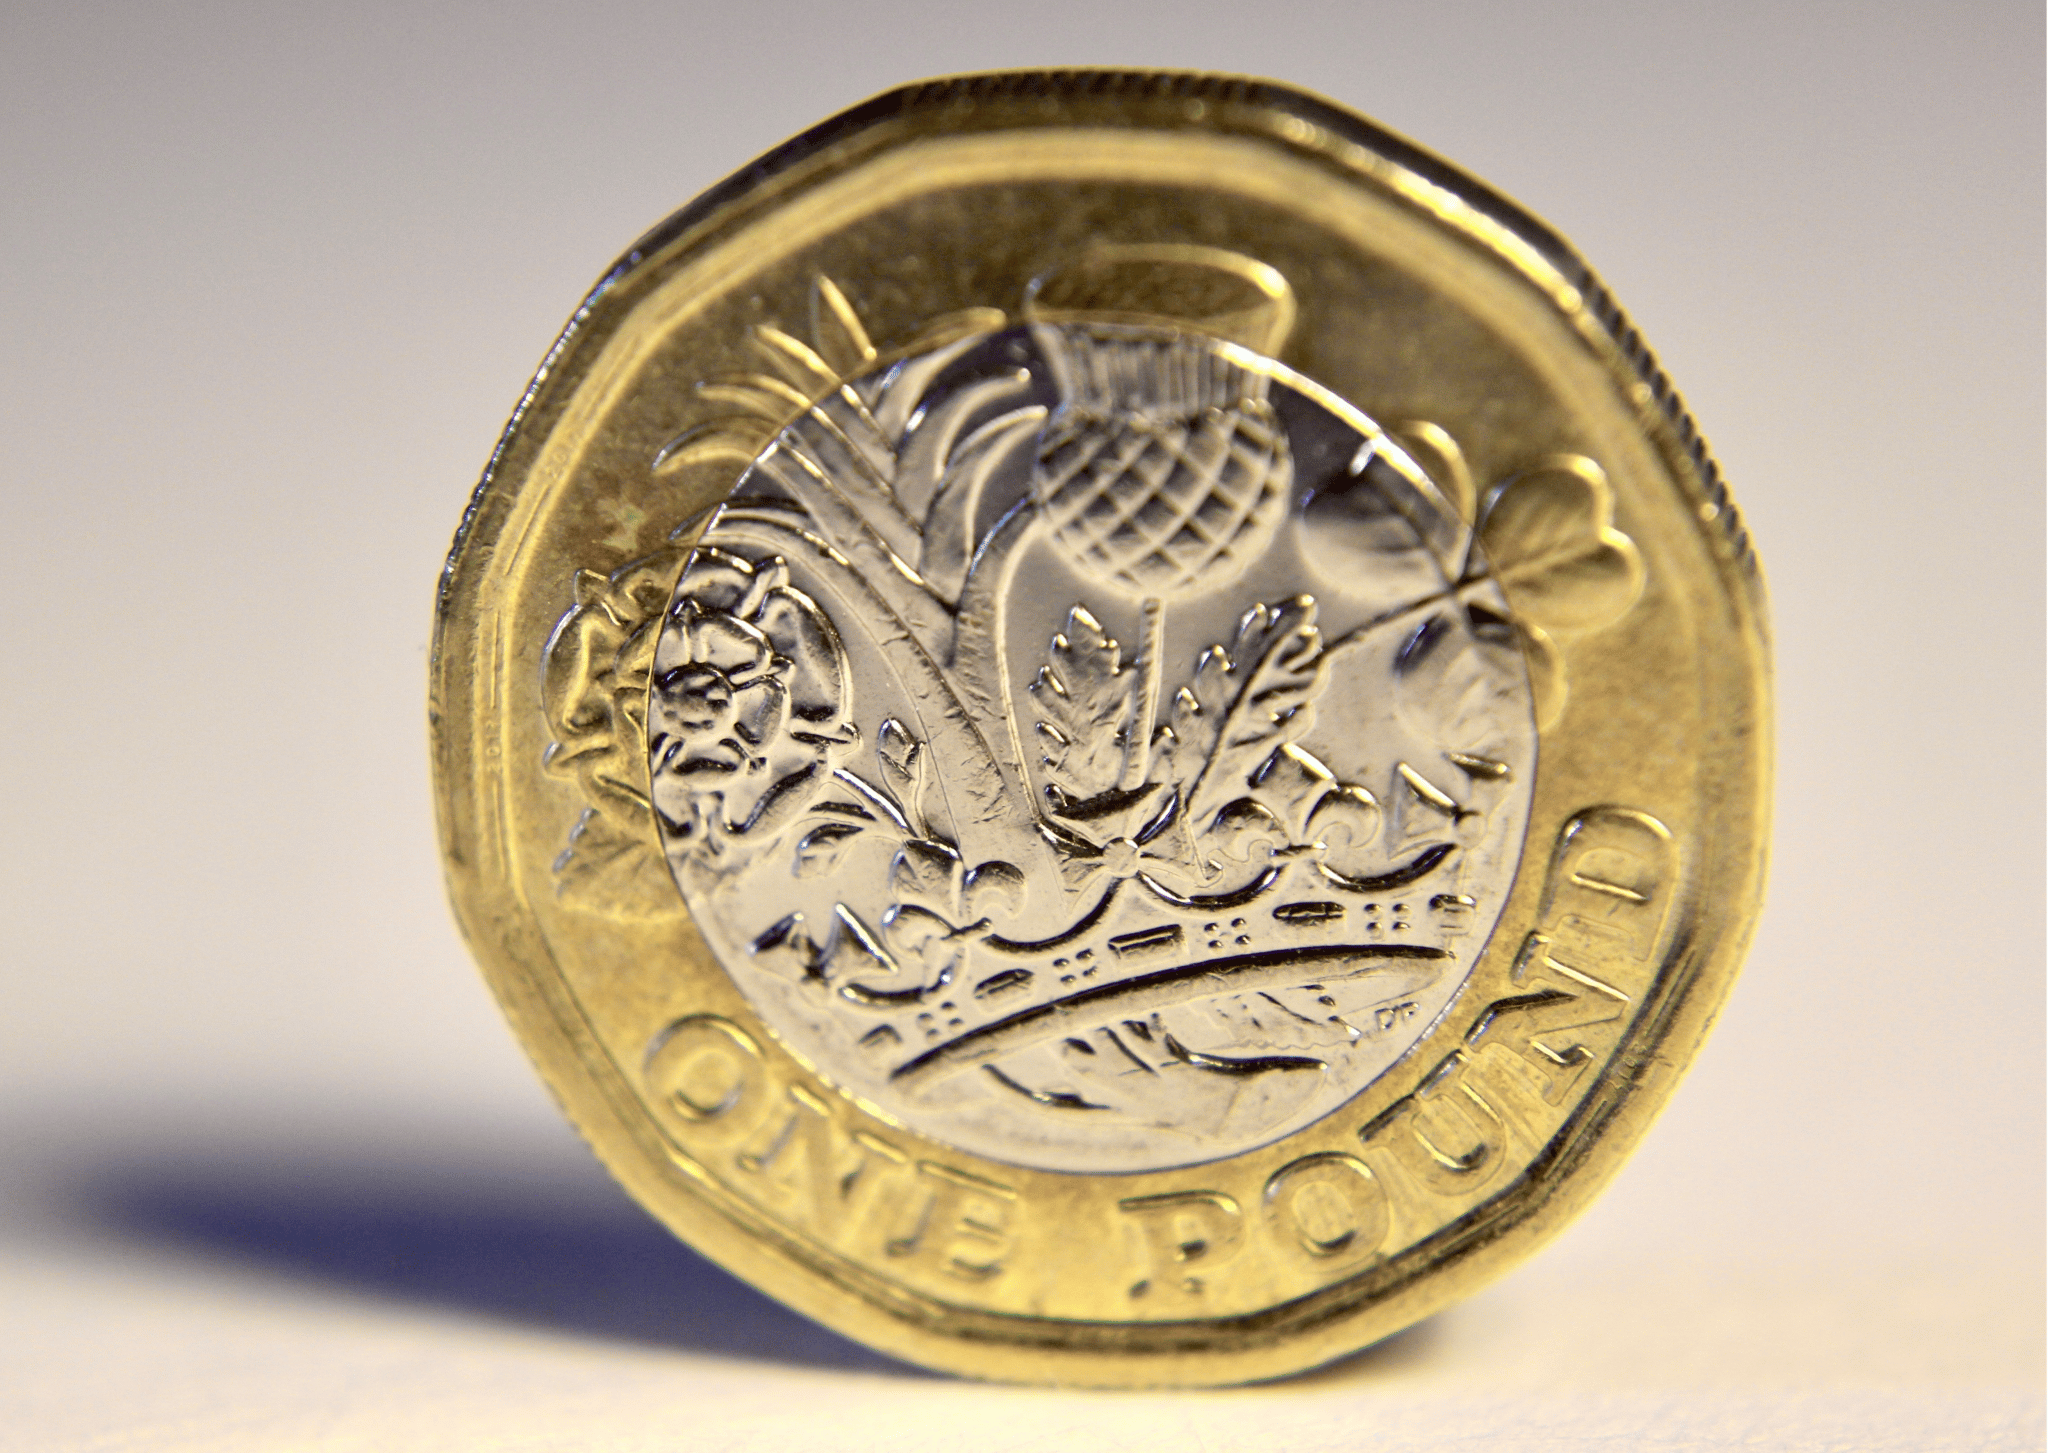 image of a pound coin